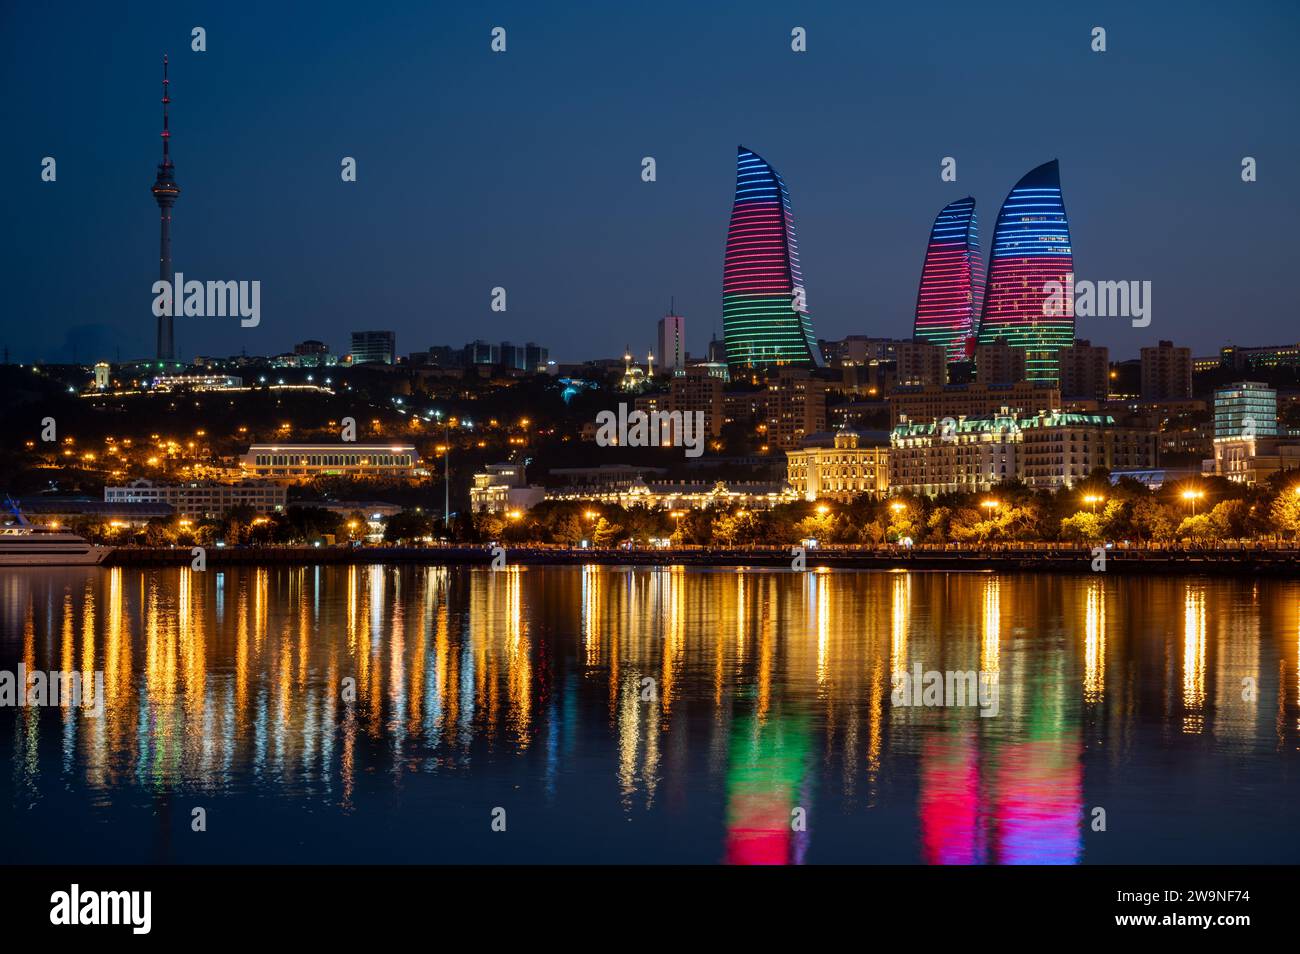 Night view of the the skyline of Baku, capital city of Azerbaijan with reflection of the Flame Towers in the waters of the Caspian Sea. Stock Photo